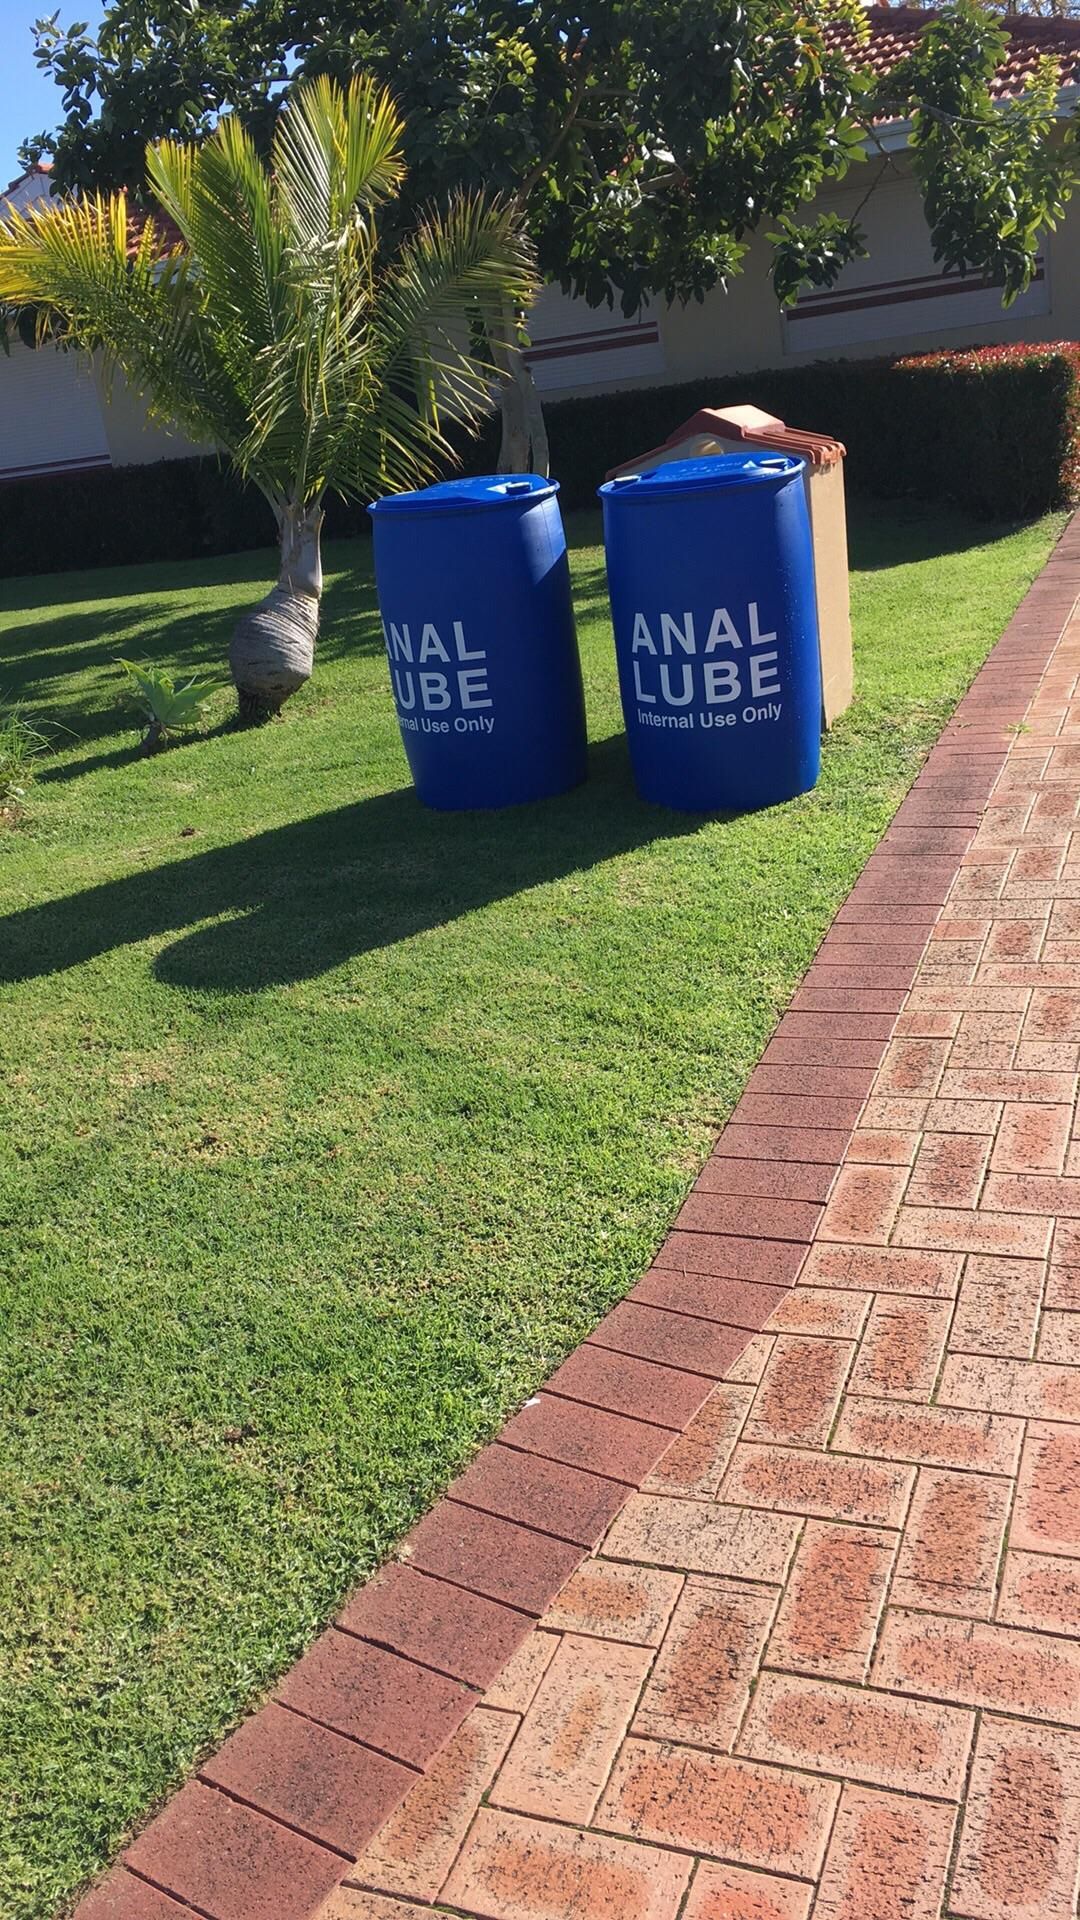 Come home from work one day and seen these two barrels outside our neighbours front lawn